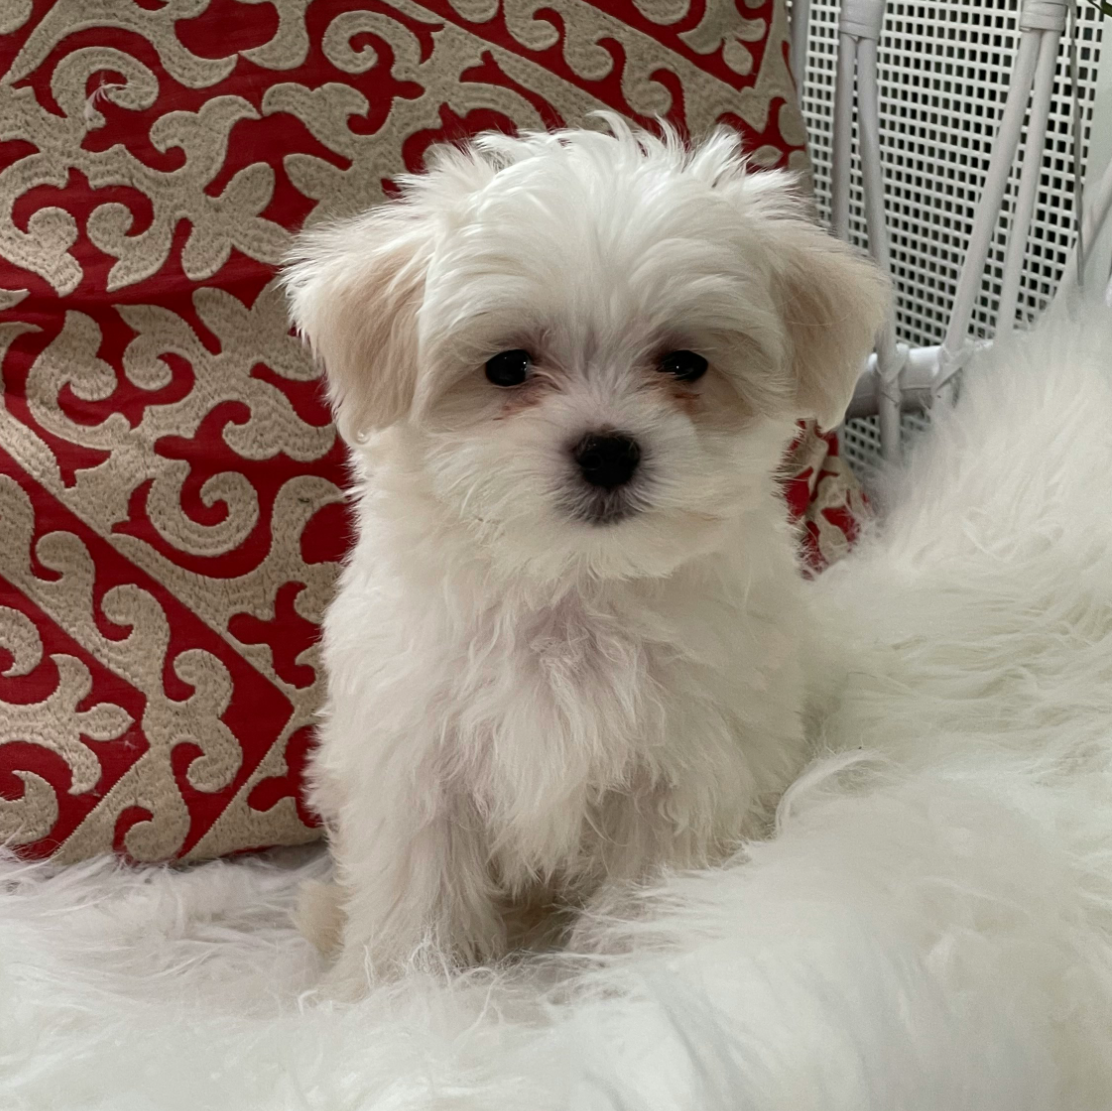 a white fluffy Maltese, a hypoallergenic dog breed, sitting on a chair with a white fluffy pillow and a red and white patterned pillow